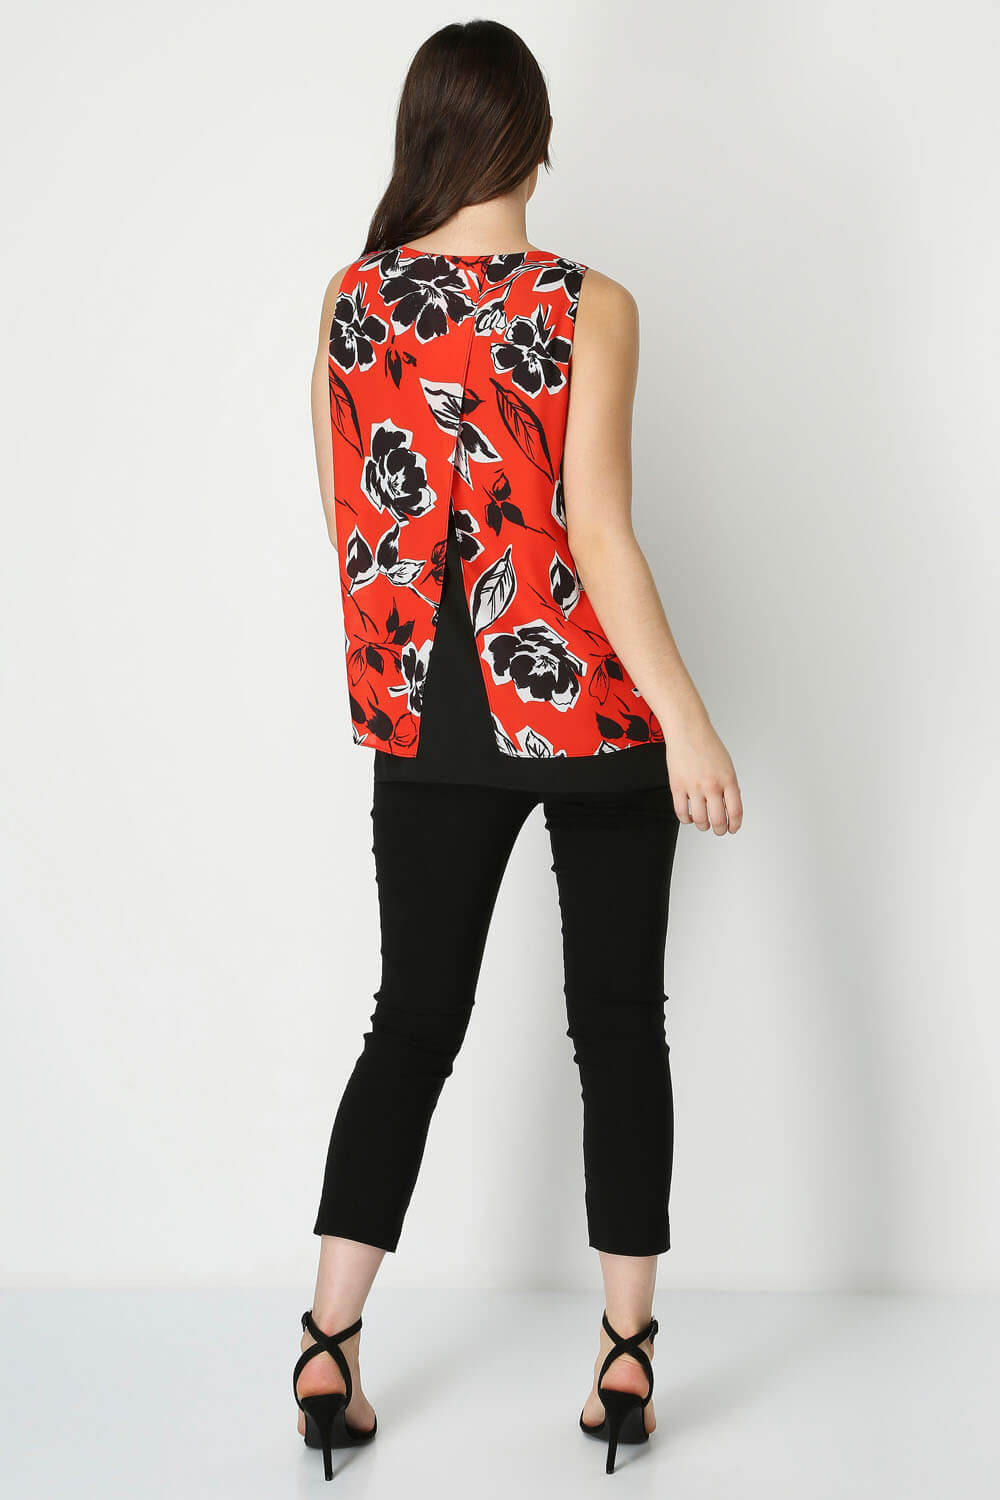 Red Sleeveless Floral Contrast Top, Image 3 of 8